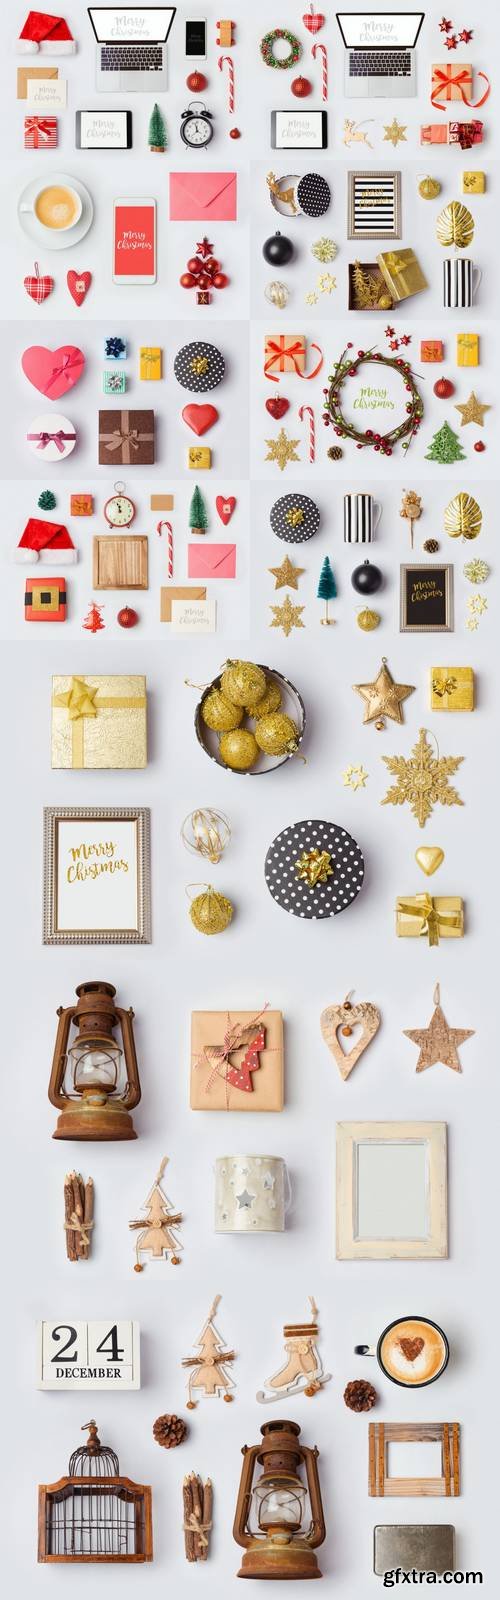 Christmas Rustic Ornaments and Objects for Mock Up Template Design